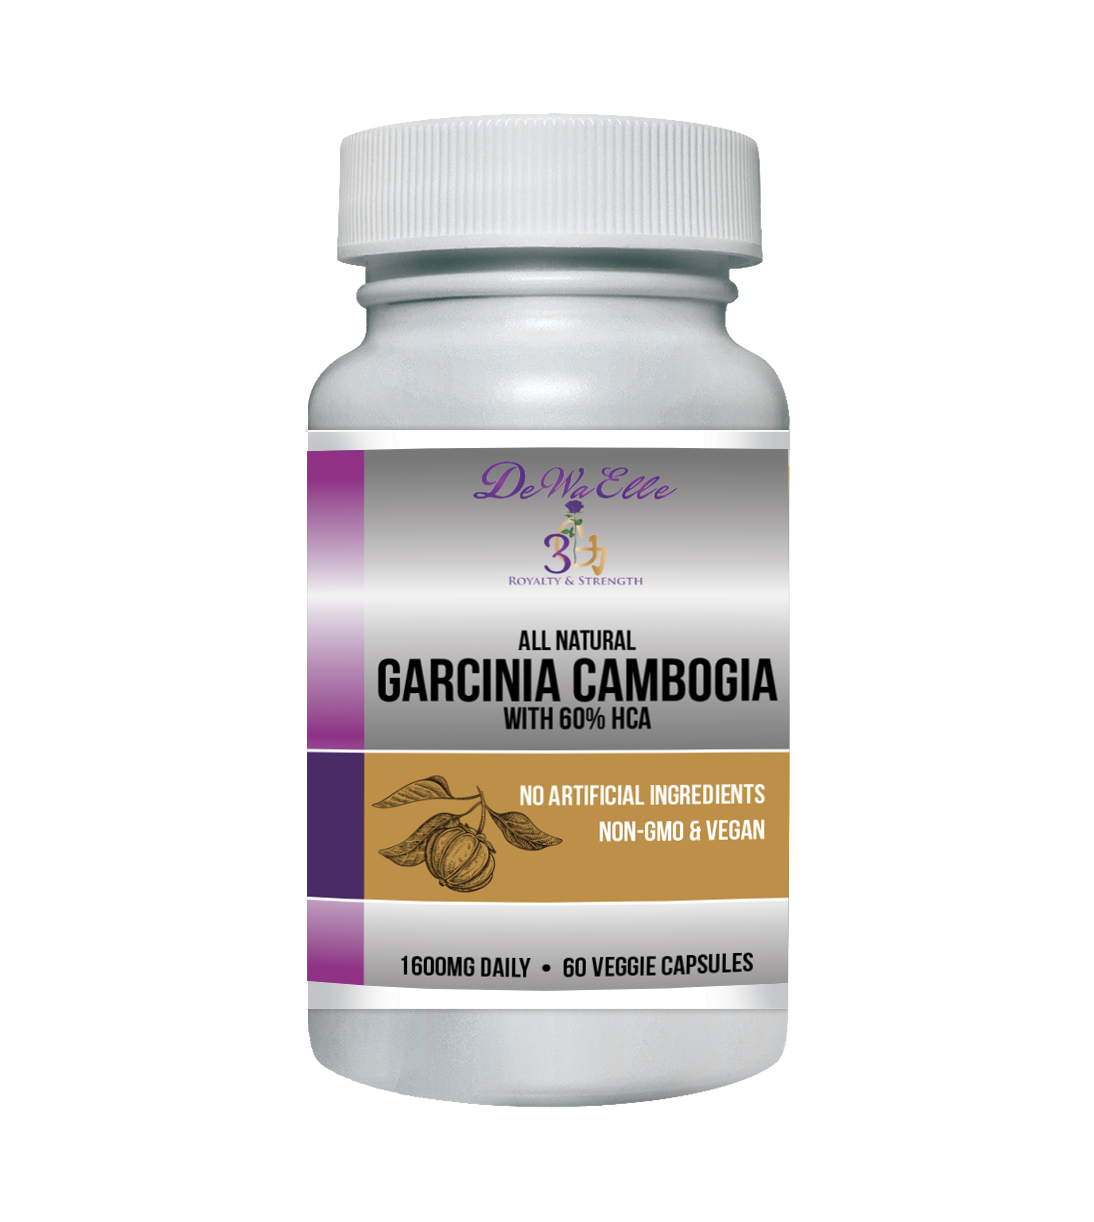 Garcinia Cambogia - SOLD OUT! MORE COMING SOON